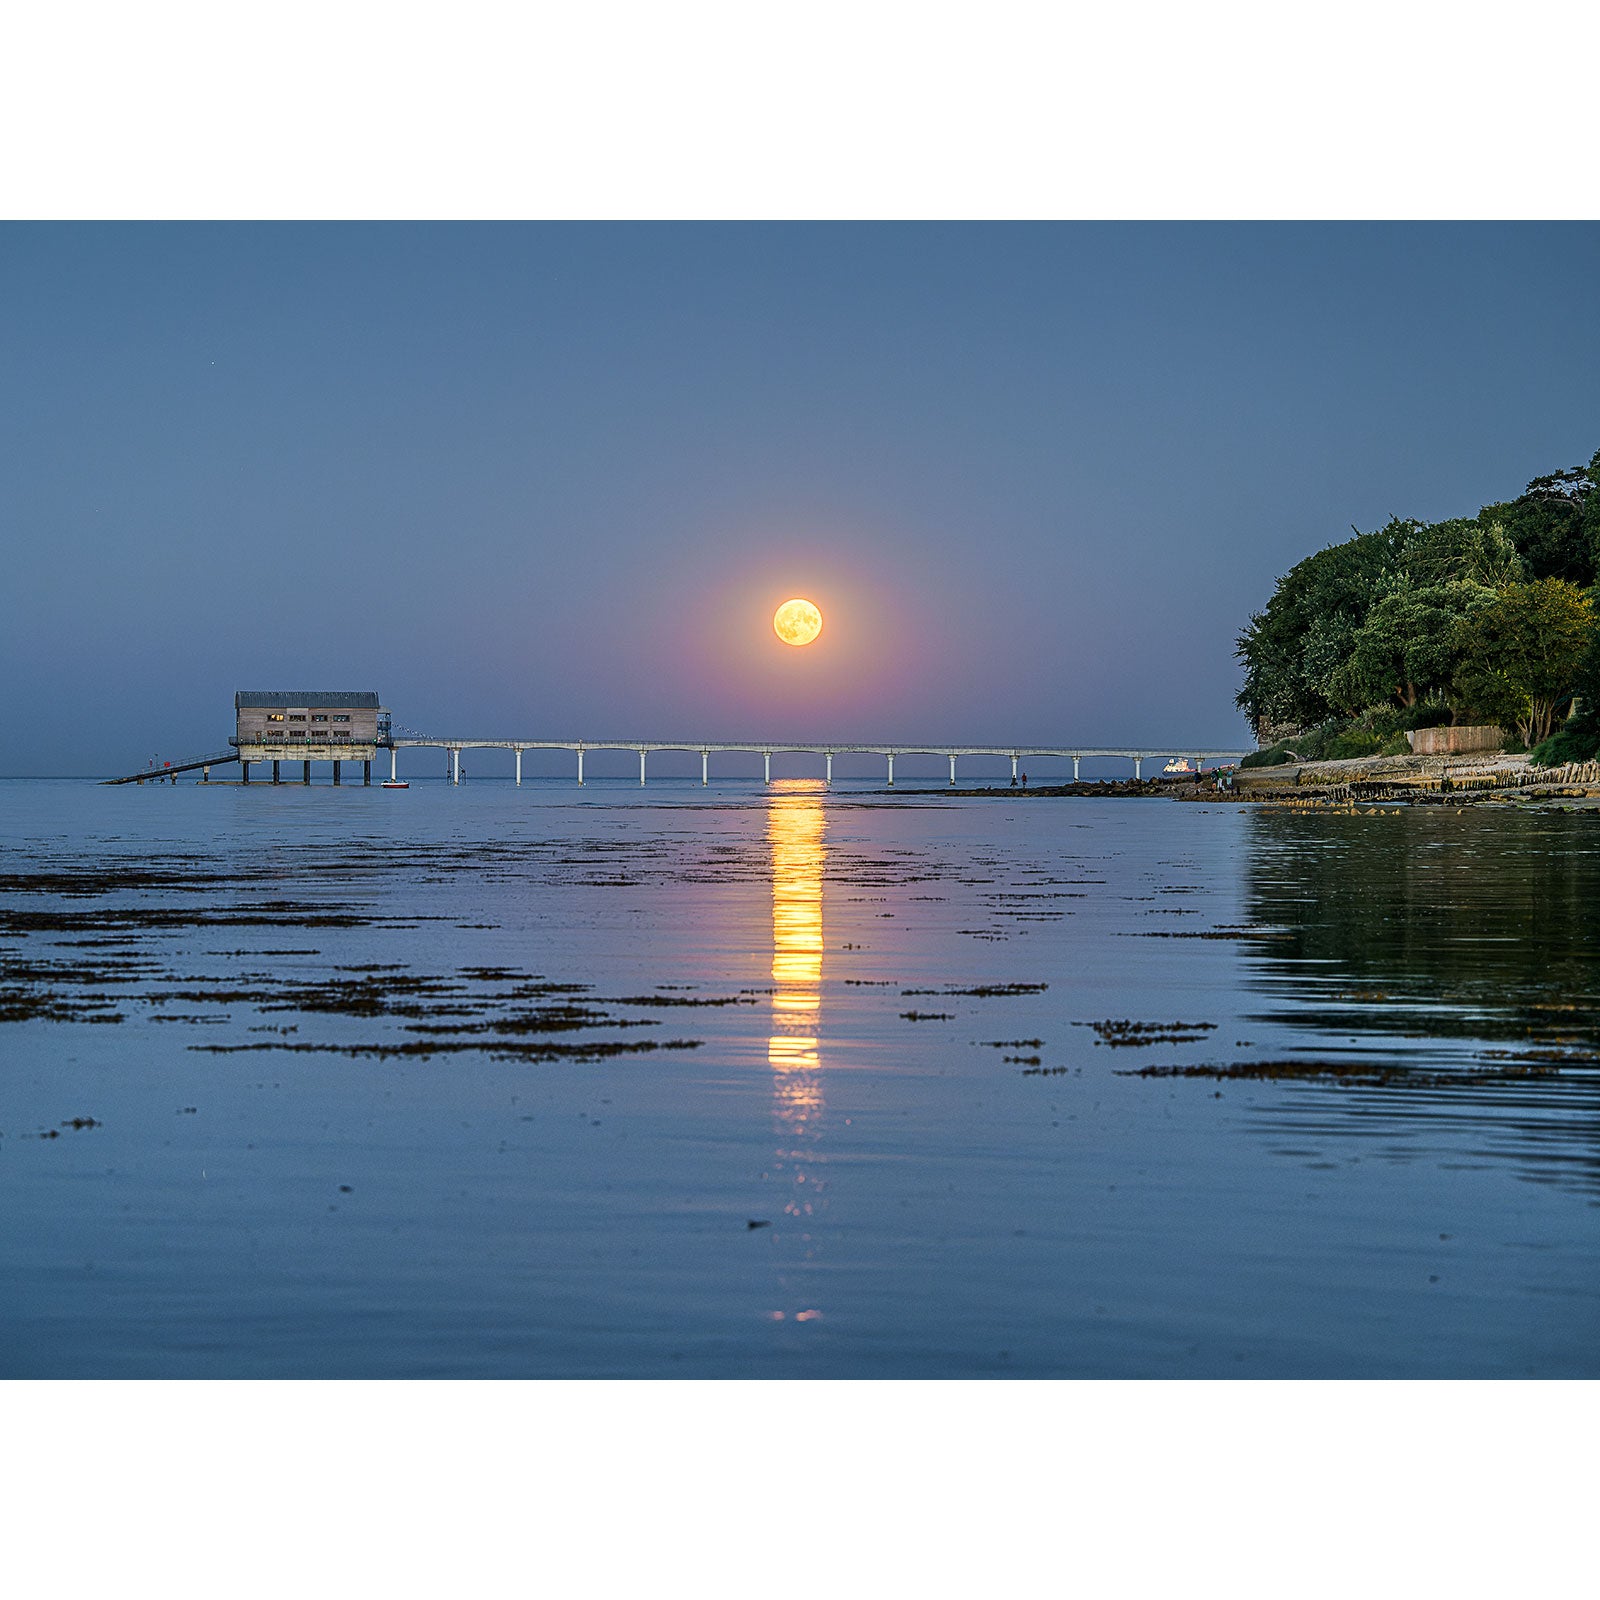 Full Moonrise over Bembridge Lifeboat Station with its reflection on the water, alongside a jetty on Gascoigne Isle by Available Light Photography.